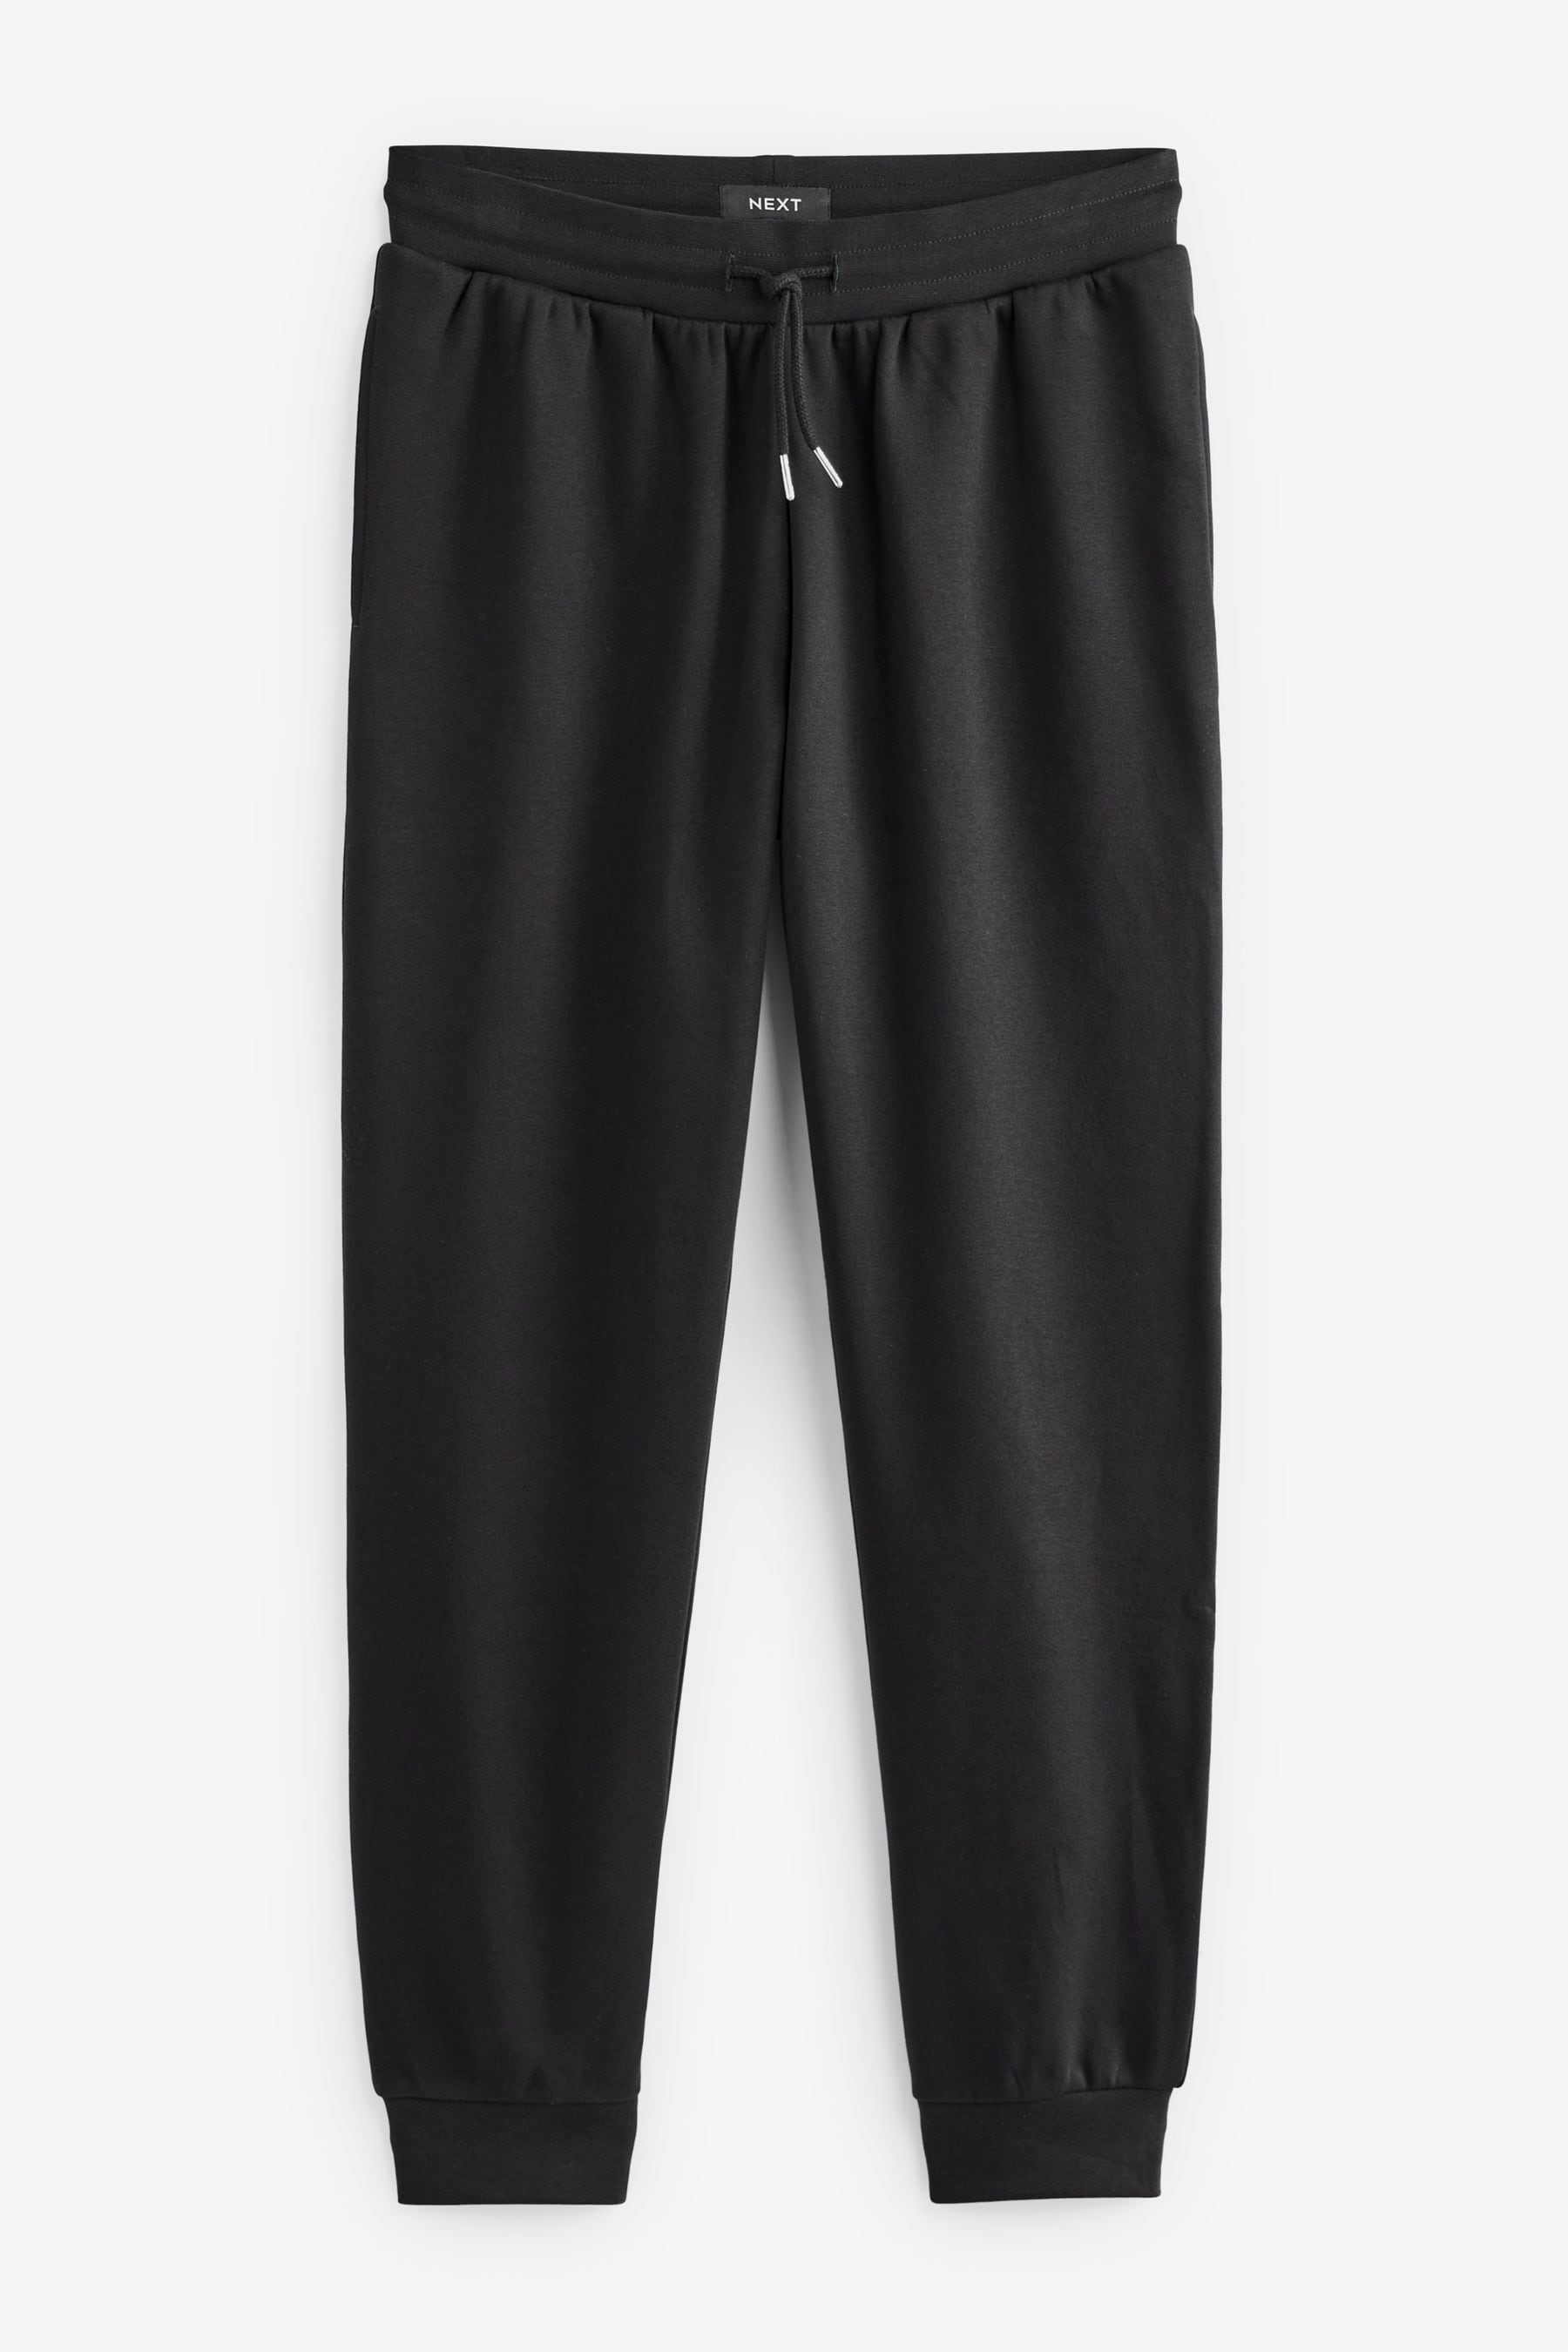 Buy Black Cuffed Joggers from the Next UK online shop